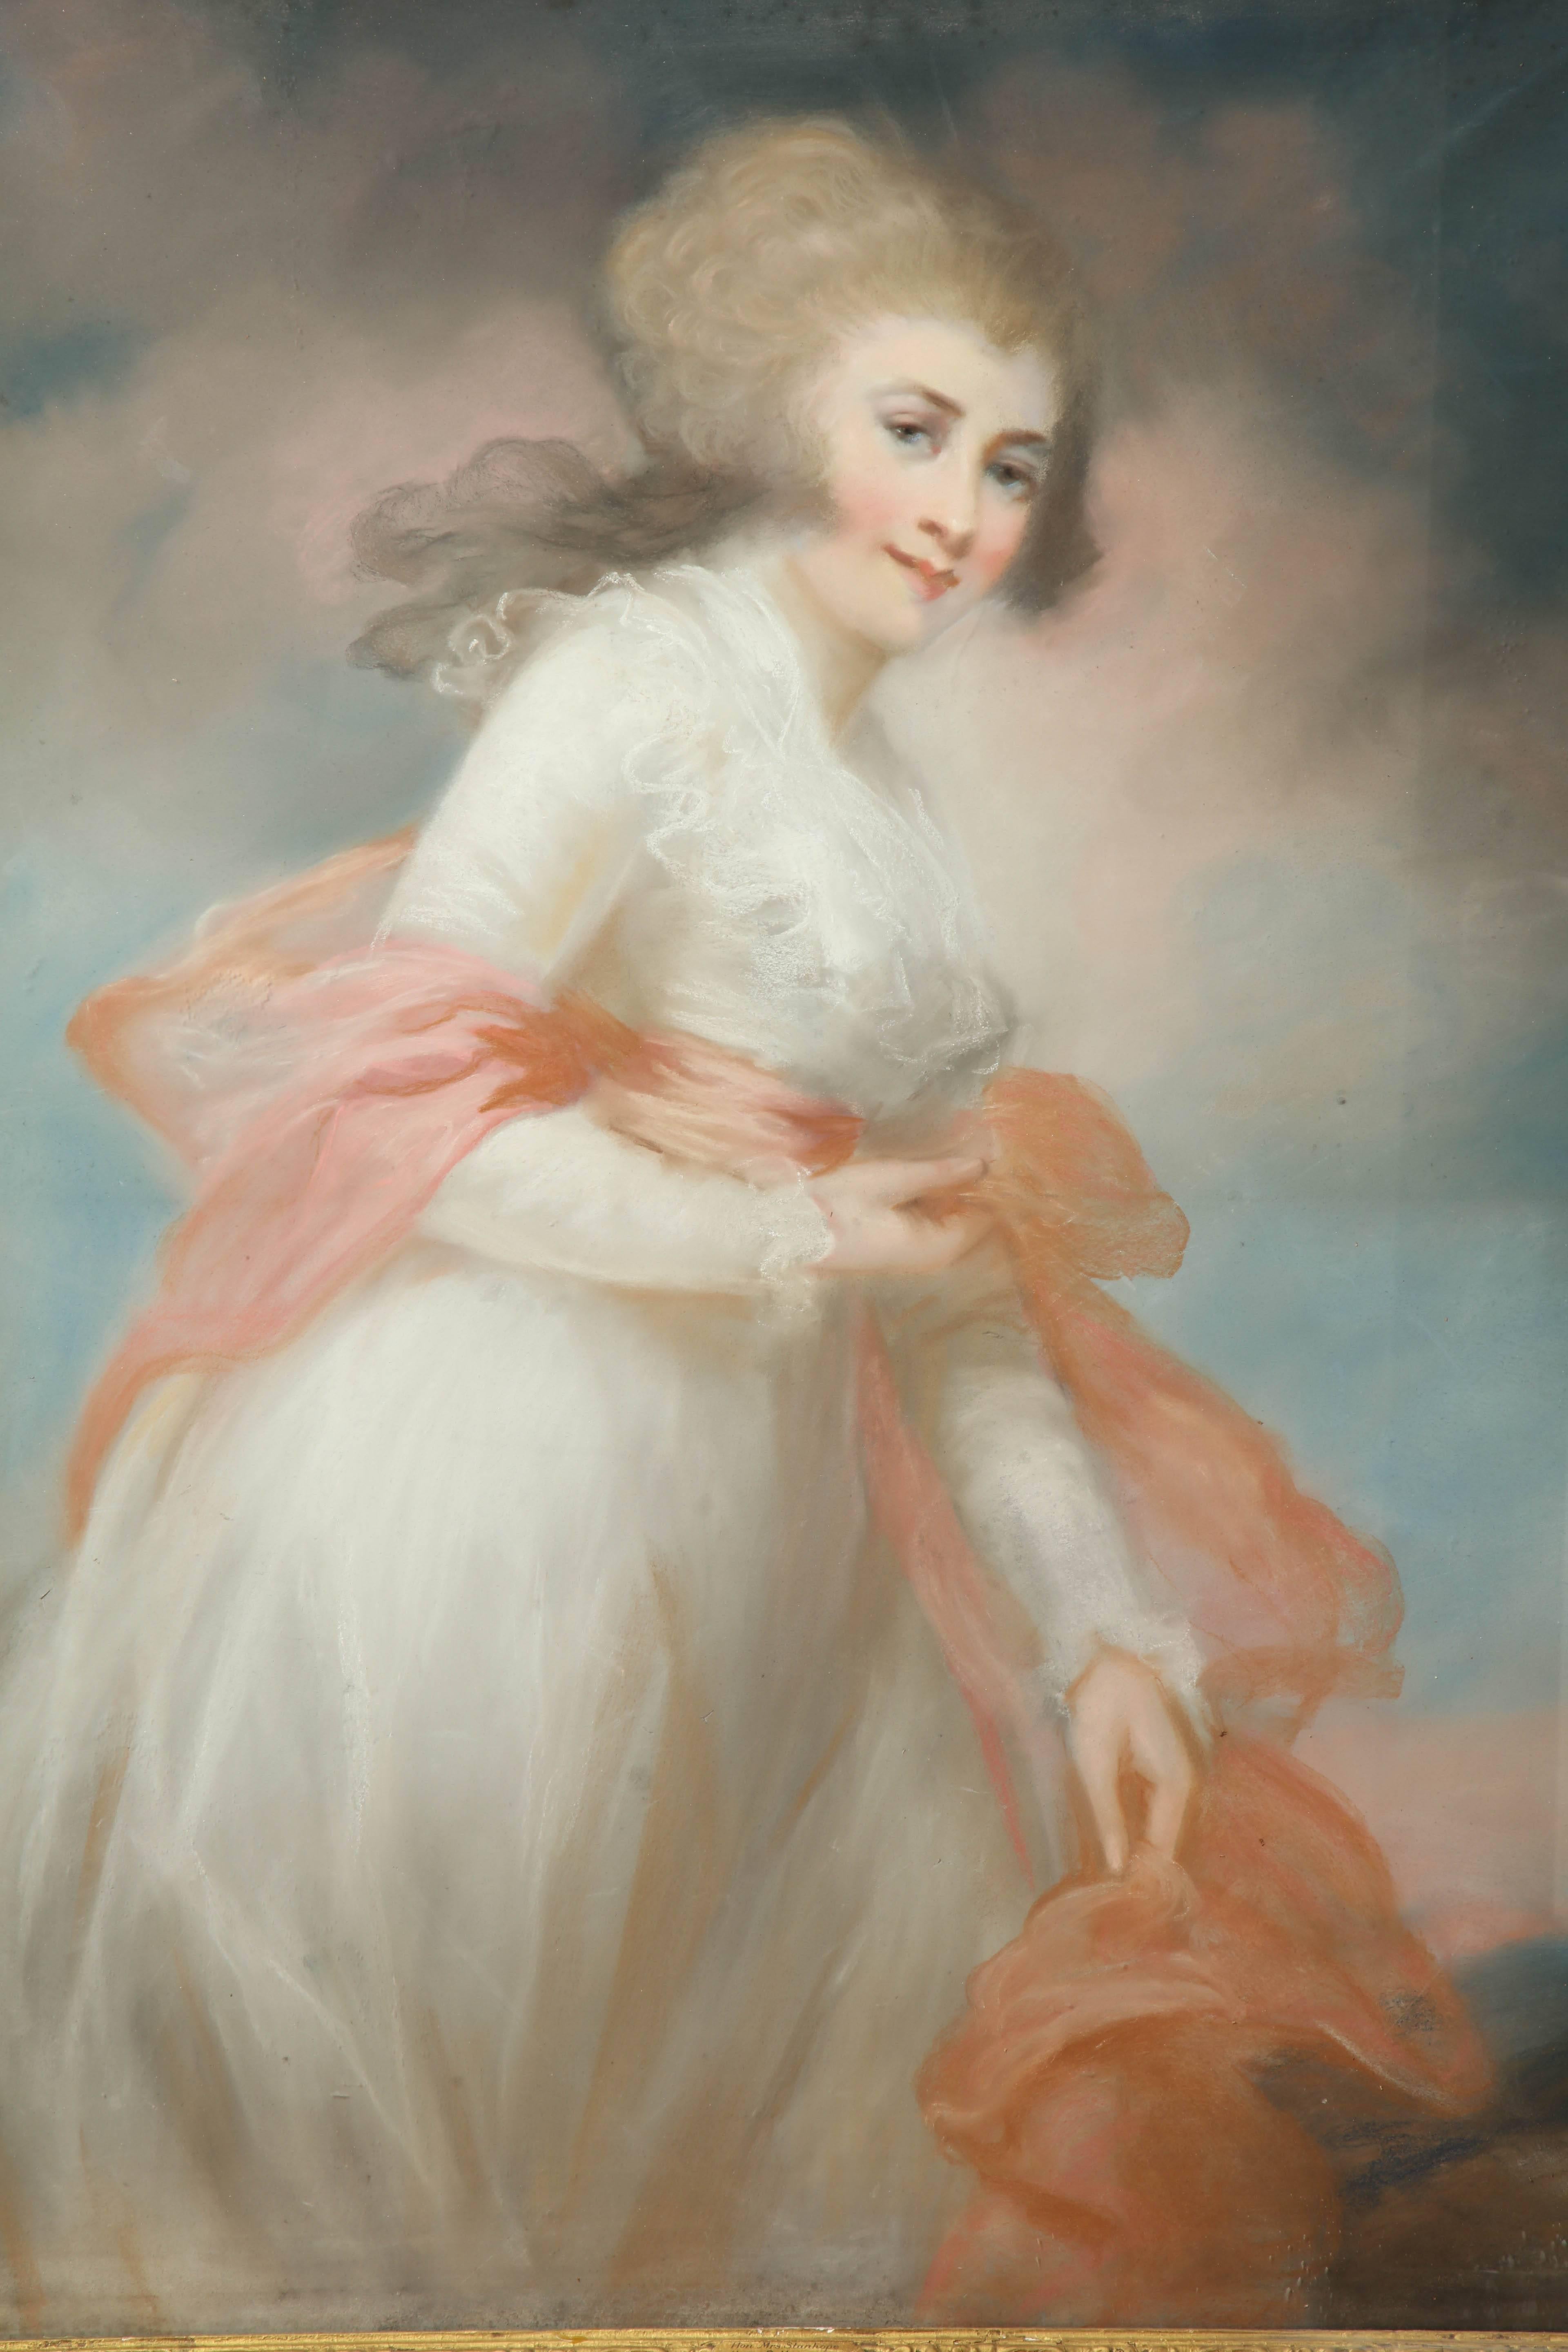 Great Britain (UK) Heroic Pastel of the Hon. Mrs. Stanhope For Sale